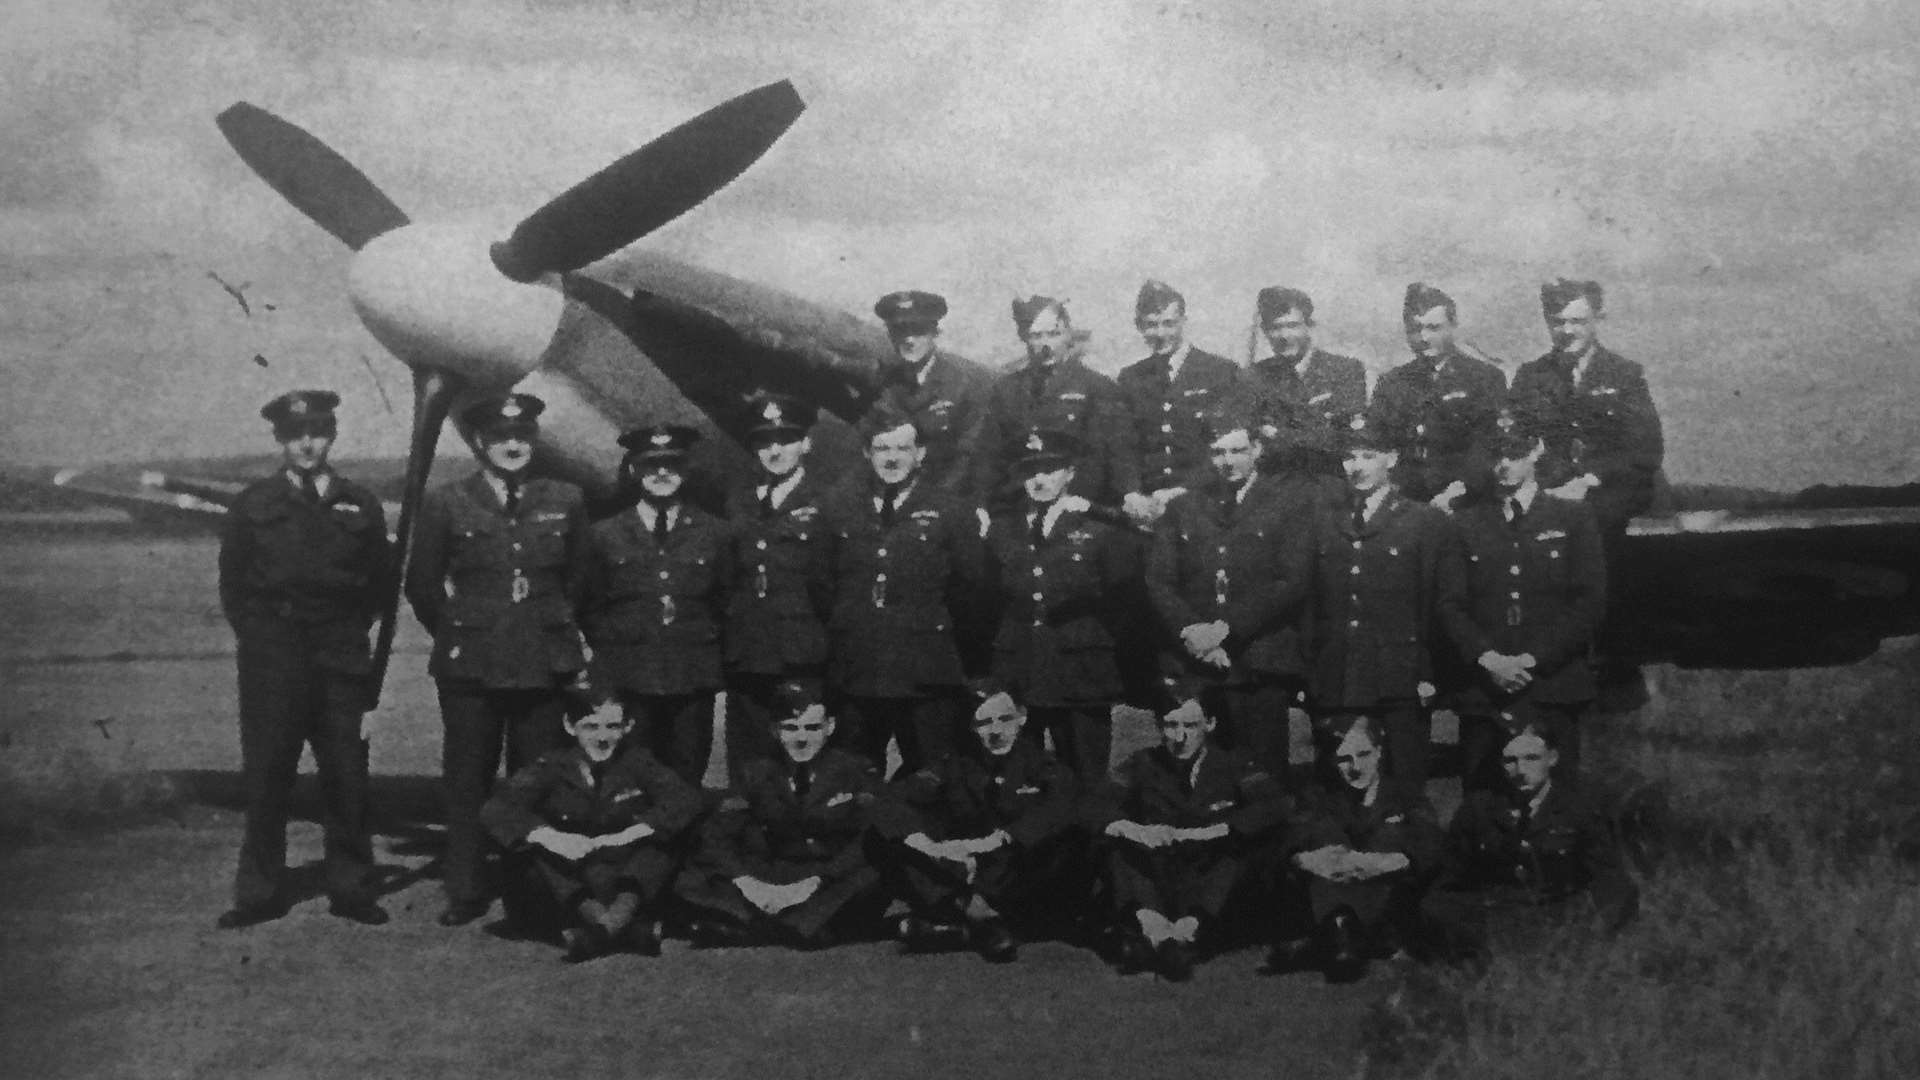 The men of 610 (County of Chester) Squadron Royal Auxiliary Air Force